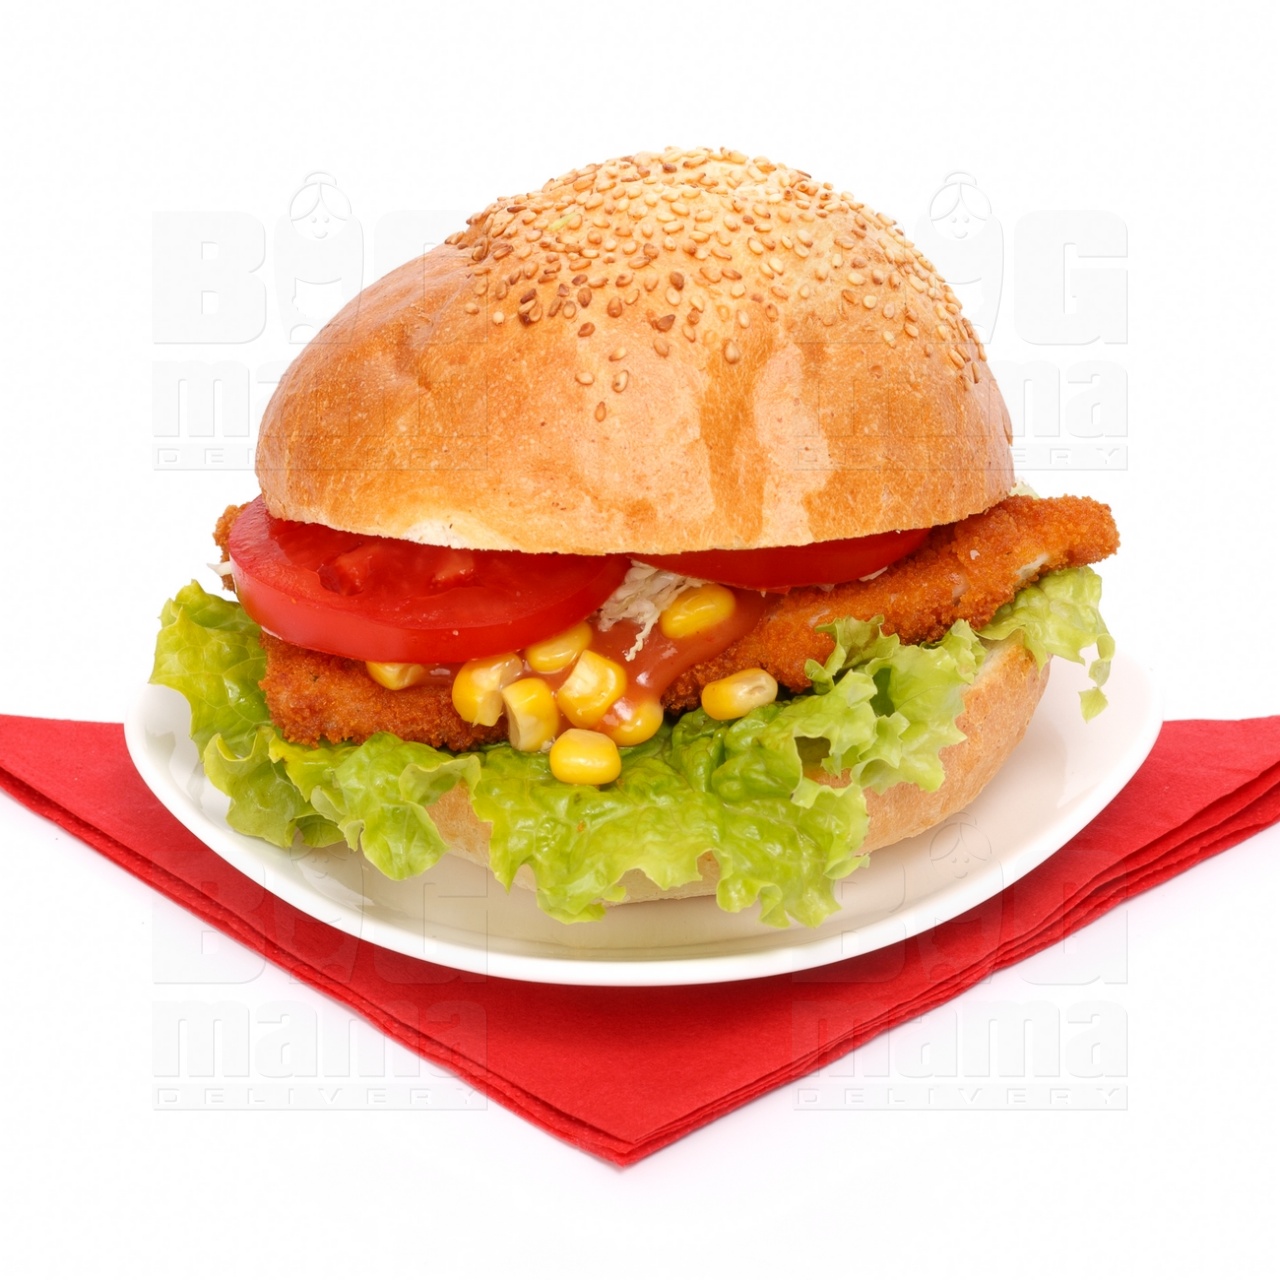 Product #53 image - Small Mexican sandwich with chicken schnitzel